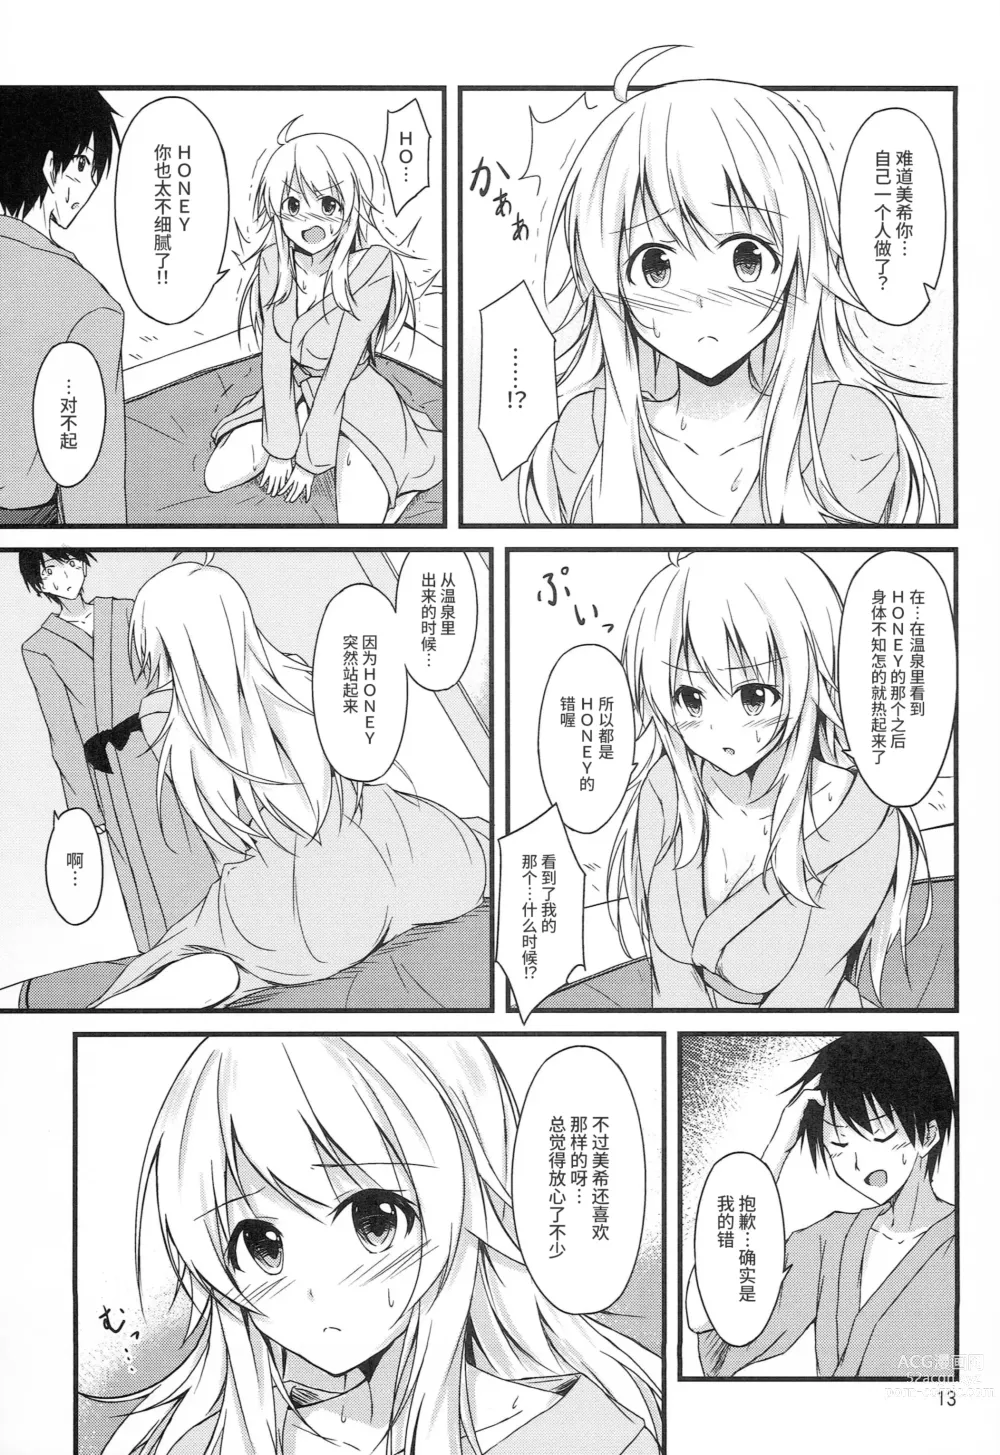 Page 11 of doujinshi Miki to Honey no DeepLove